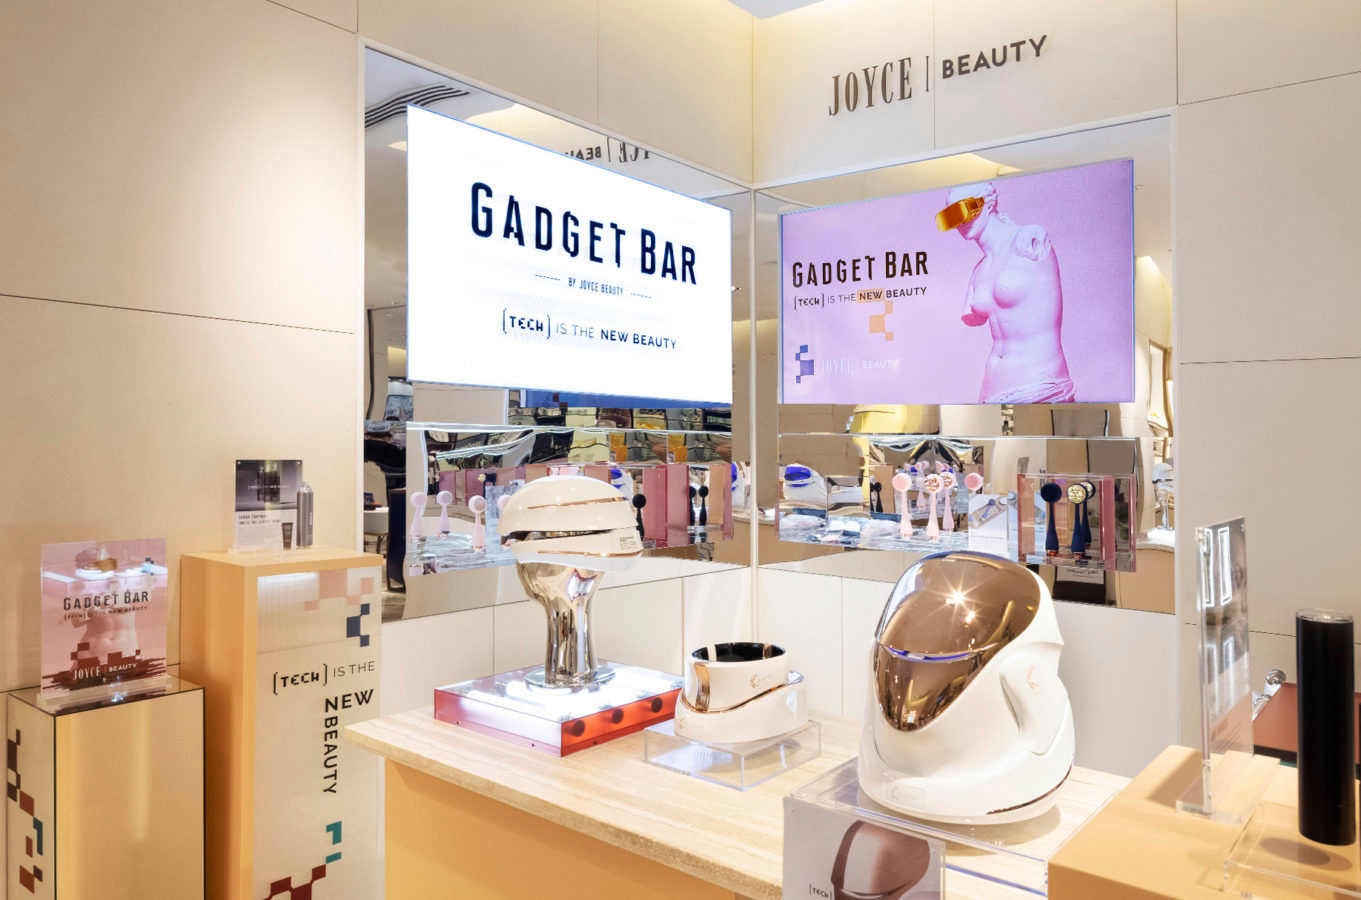 The Gadget Bar By JOYCE Beauty: Professional-Level Results in Your Own Home